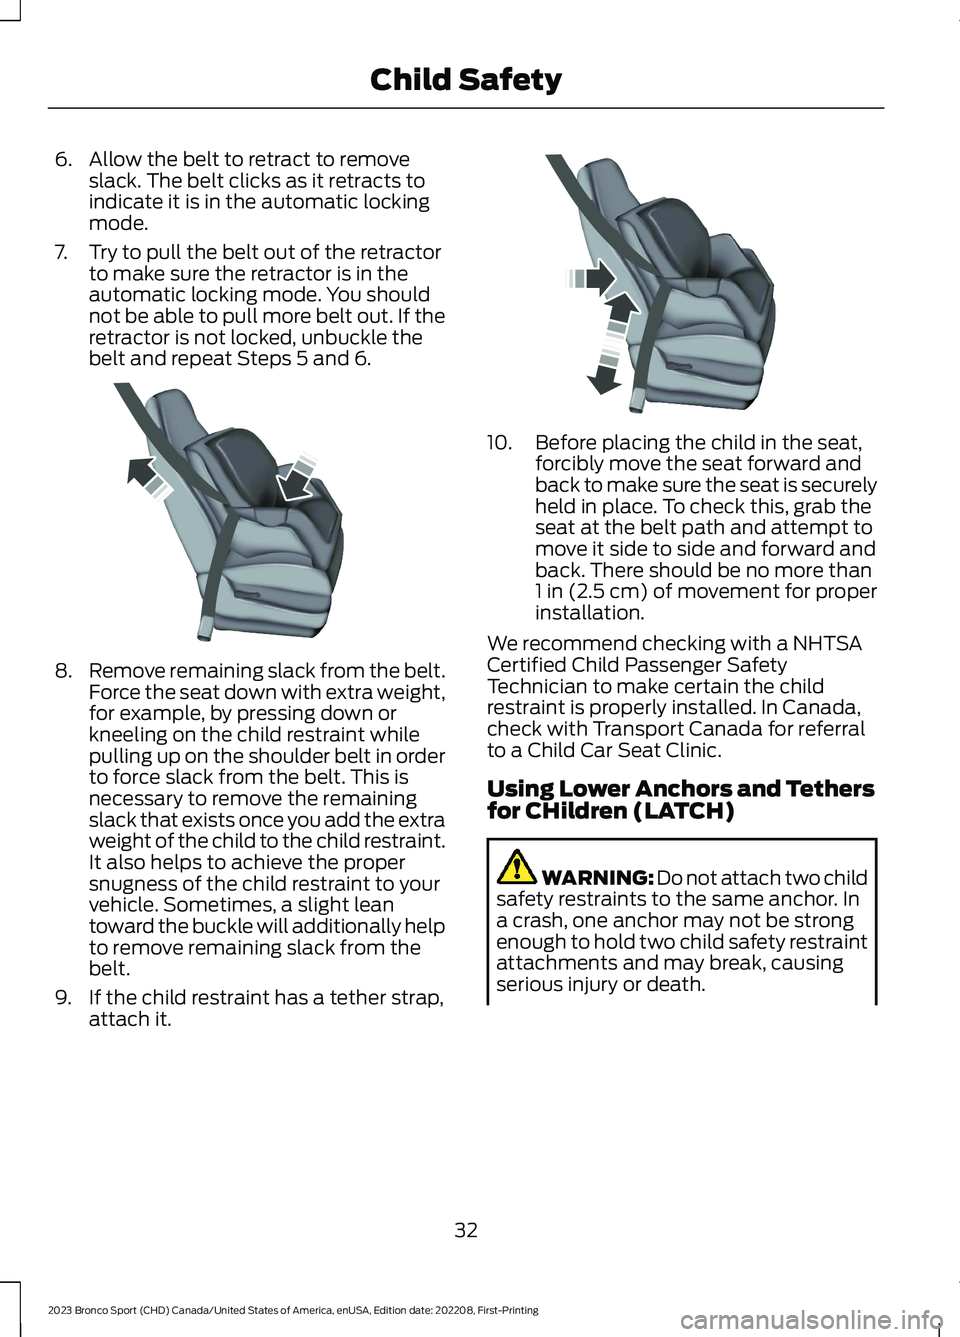 FORD BRONCO SPORT 2023  Owners Manual 6.Allow the belt to retract to removeslack. The belt clicks as it retracts toindicate it is in the automatic lockingmode.
7.Try to pull the belt out of the retractorto make sure the retractor is in th